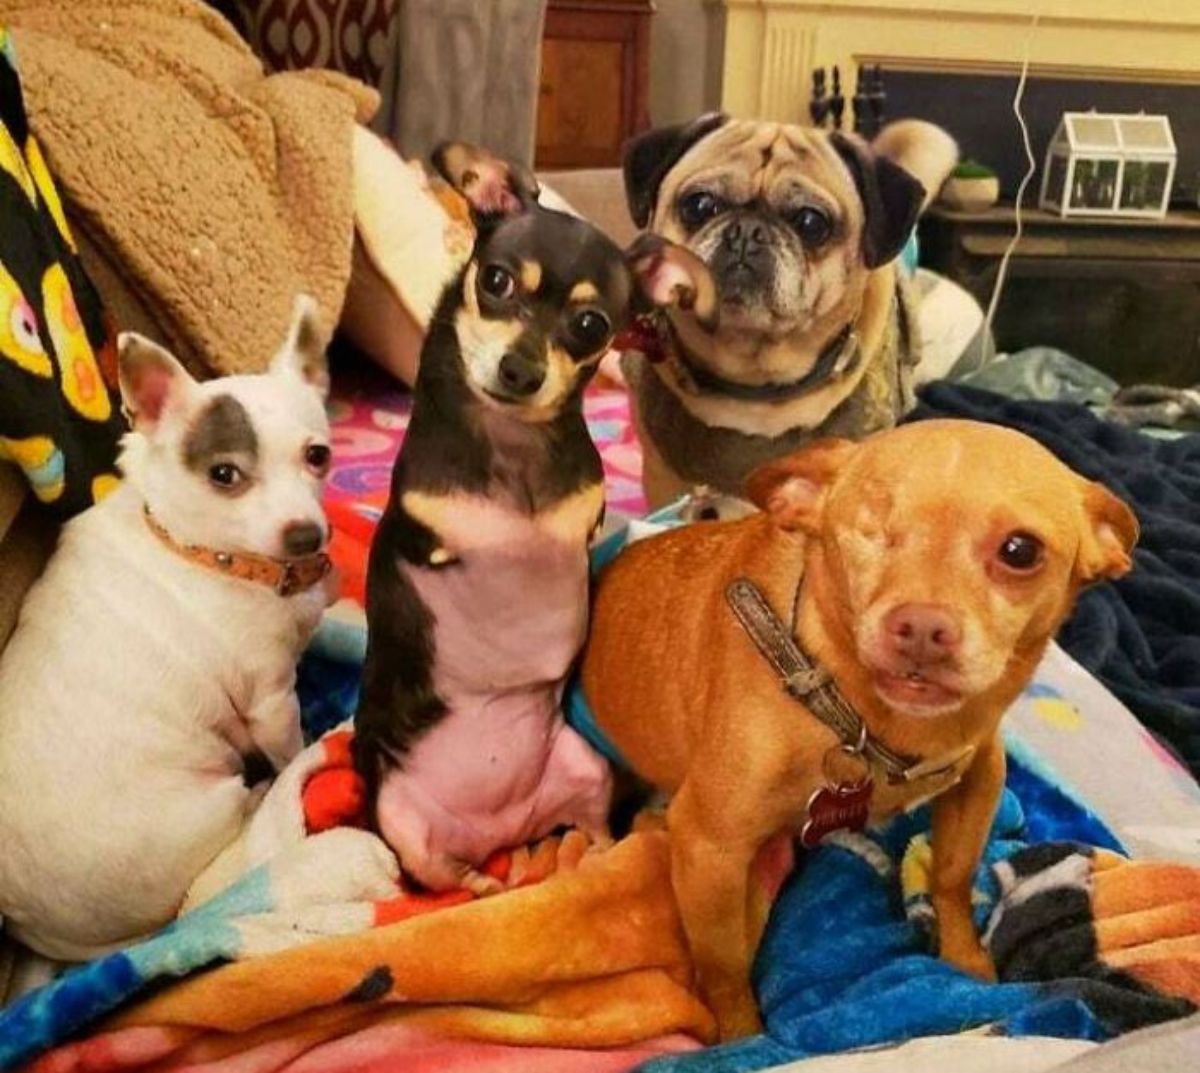 1 black and white small dog, 1 2-legged black and brown small dog, 1 brown pug and 1 1-eyed brown dog on a bunch of blankets